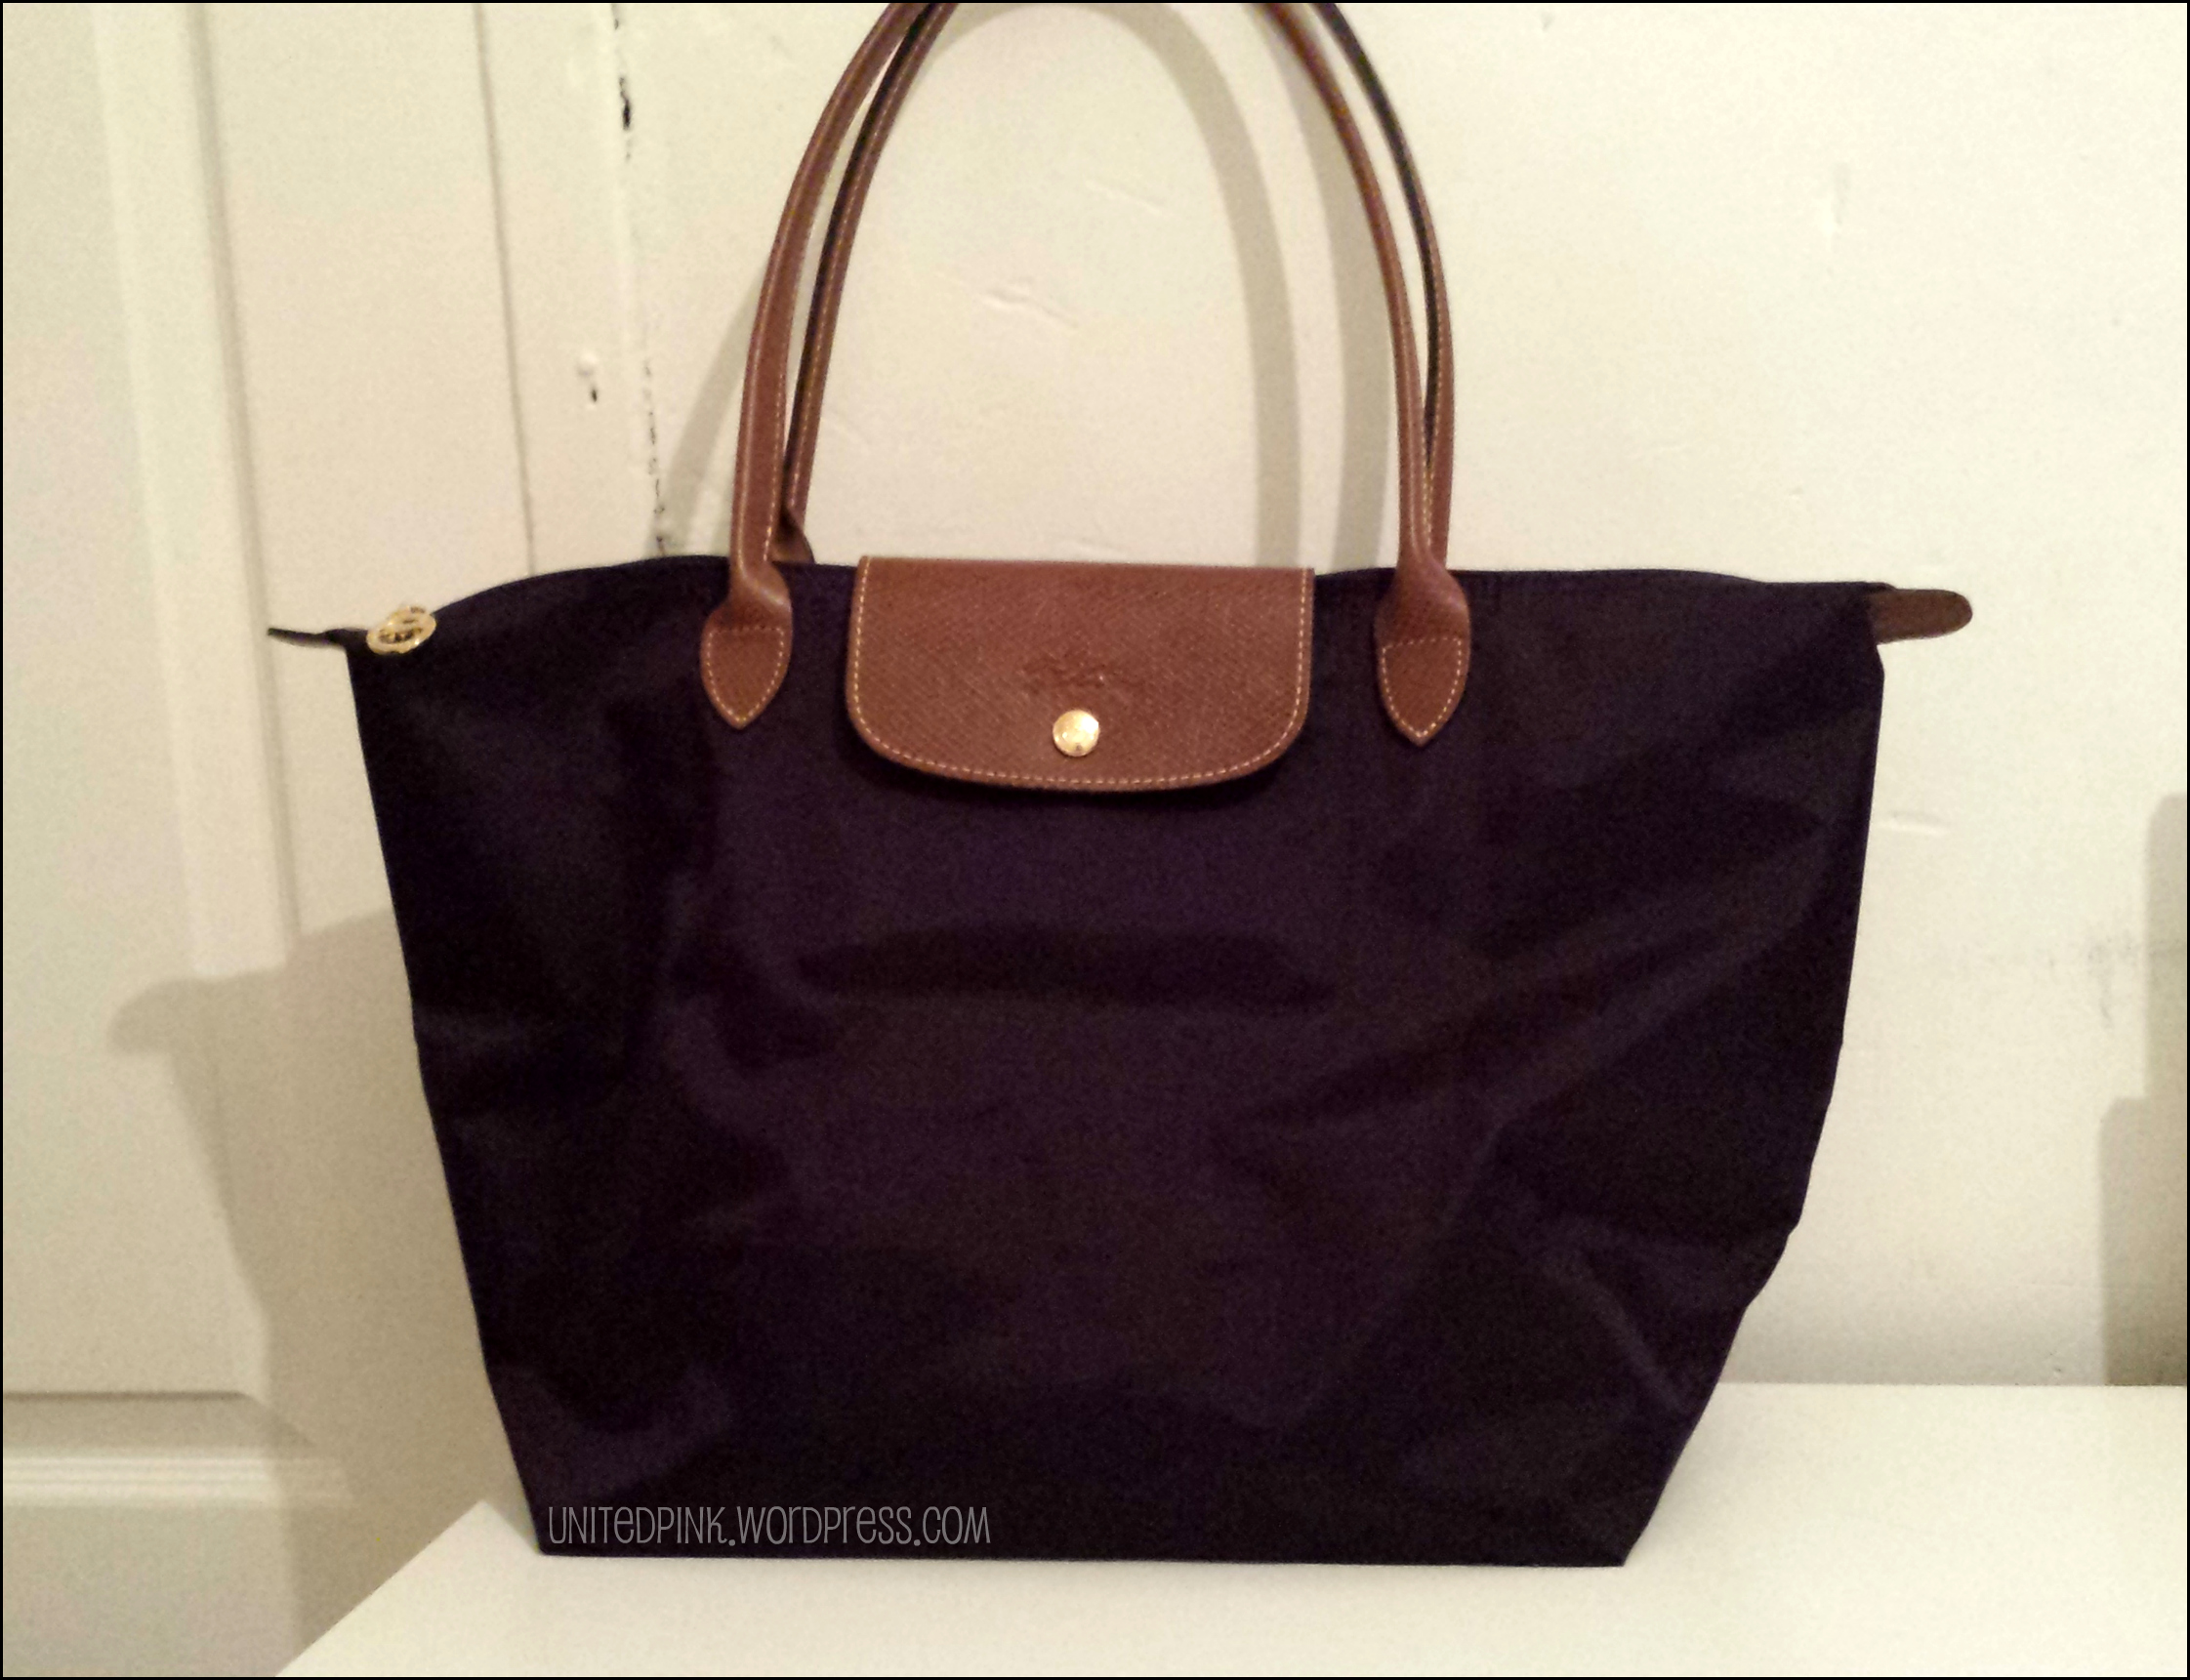 Longchamp Le Pliage cosmetic case : Review and what fits 